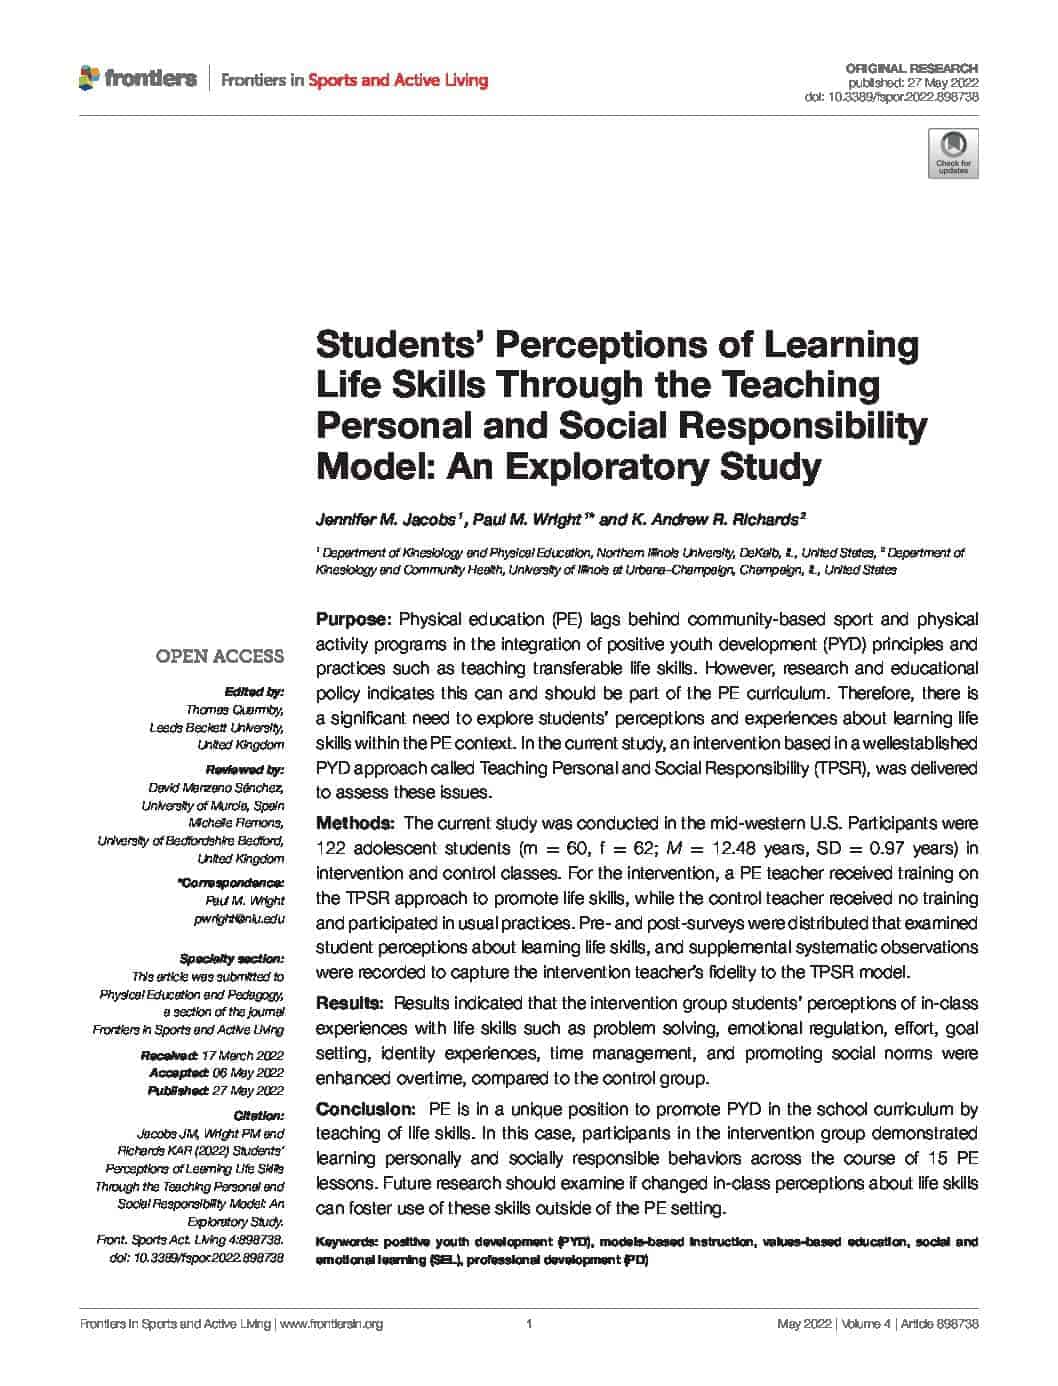 Students’ Perceptions of Learning Life Skills Through the Teaching Personal and Social Responsibility Model: An Exploratory Study